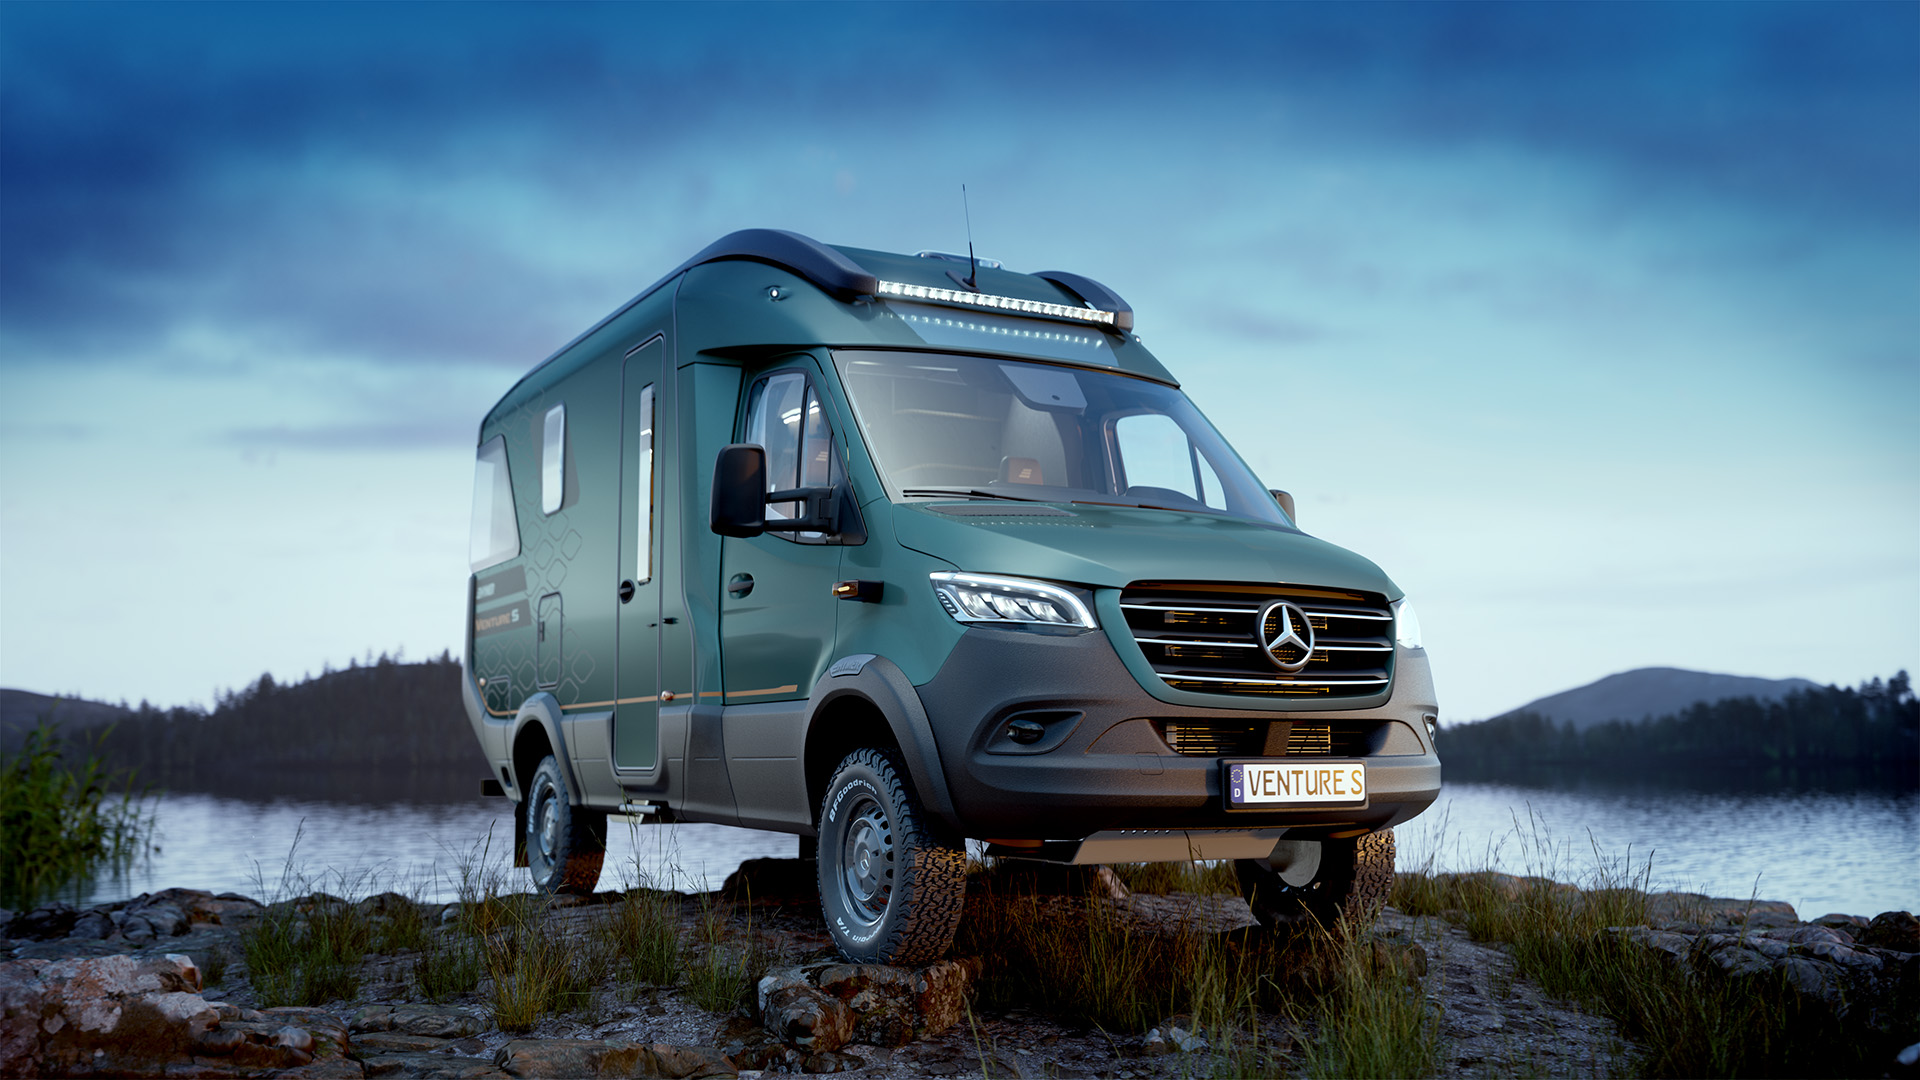 The New HYMER Venture S